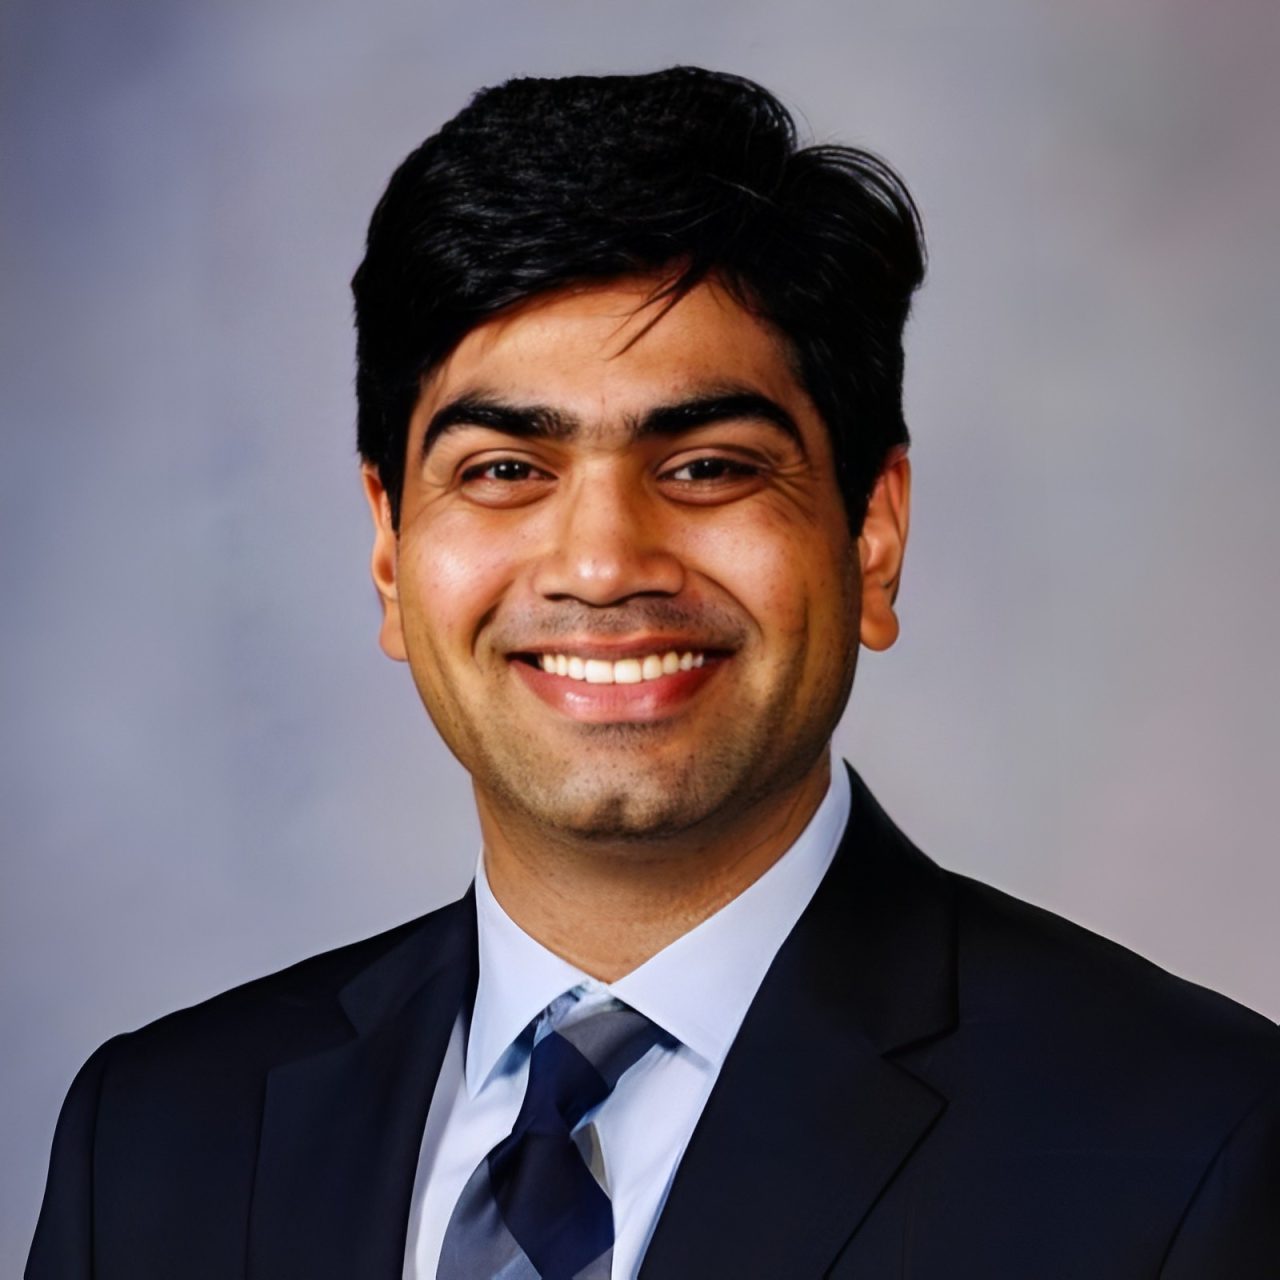 Saurabh Zanwar: Delighted to share my academic promotion to Assistant Professor in Medicine and Oncology.